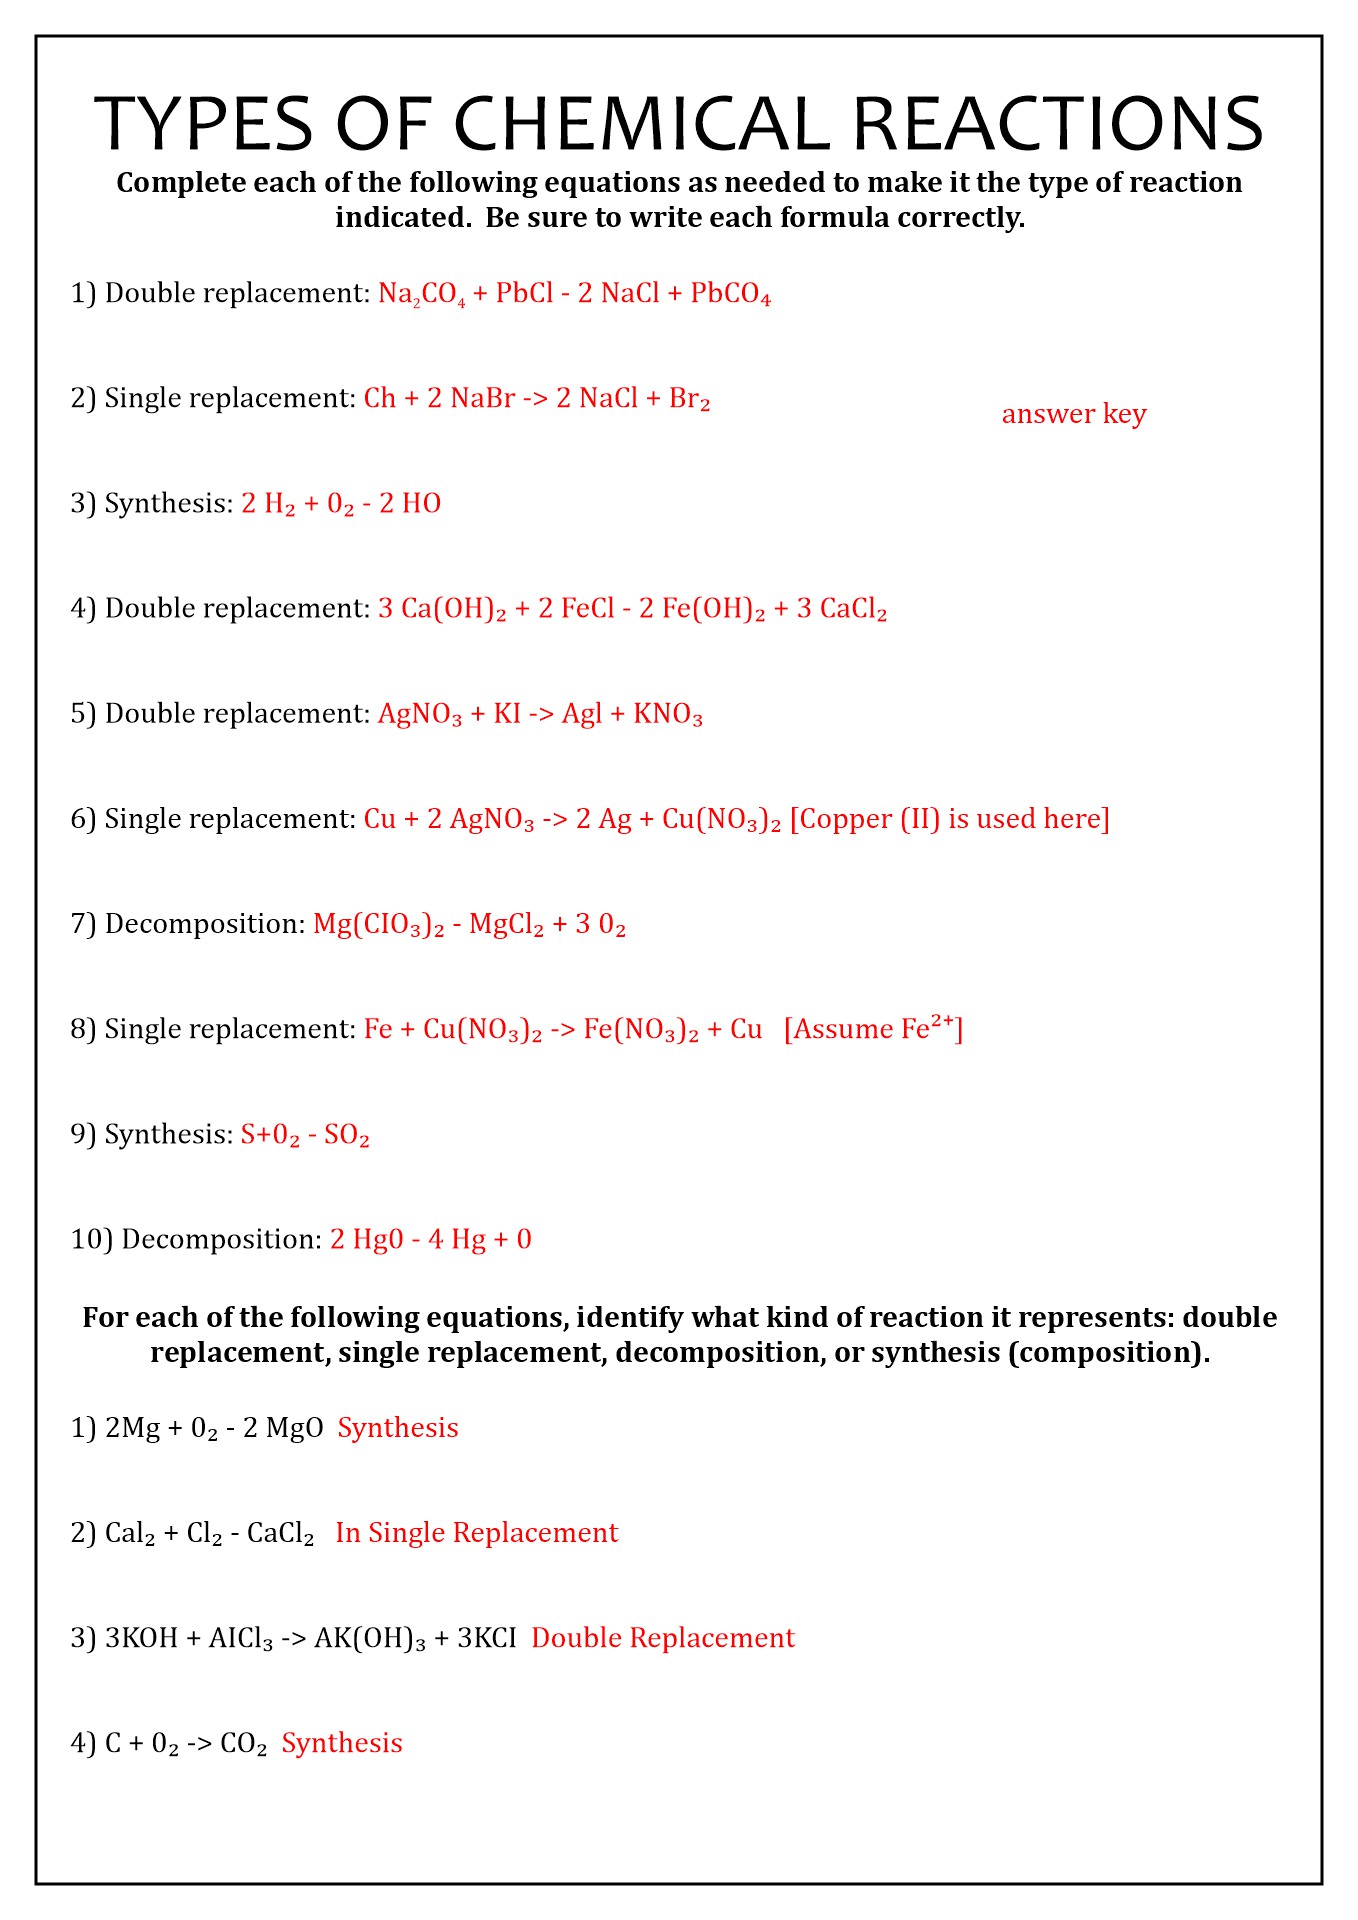 16-best-images-of-types-chemical-reactions-worksheets-answers-types